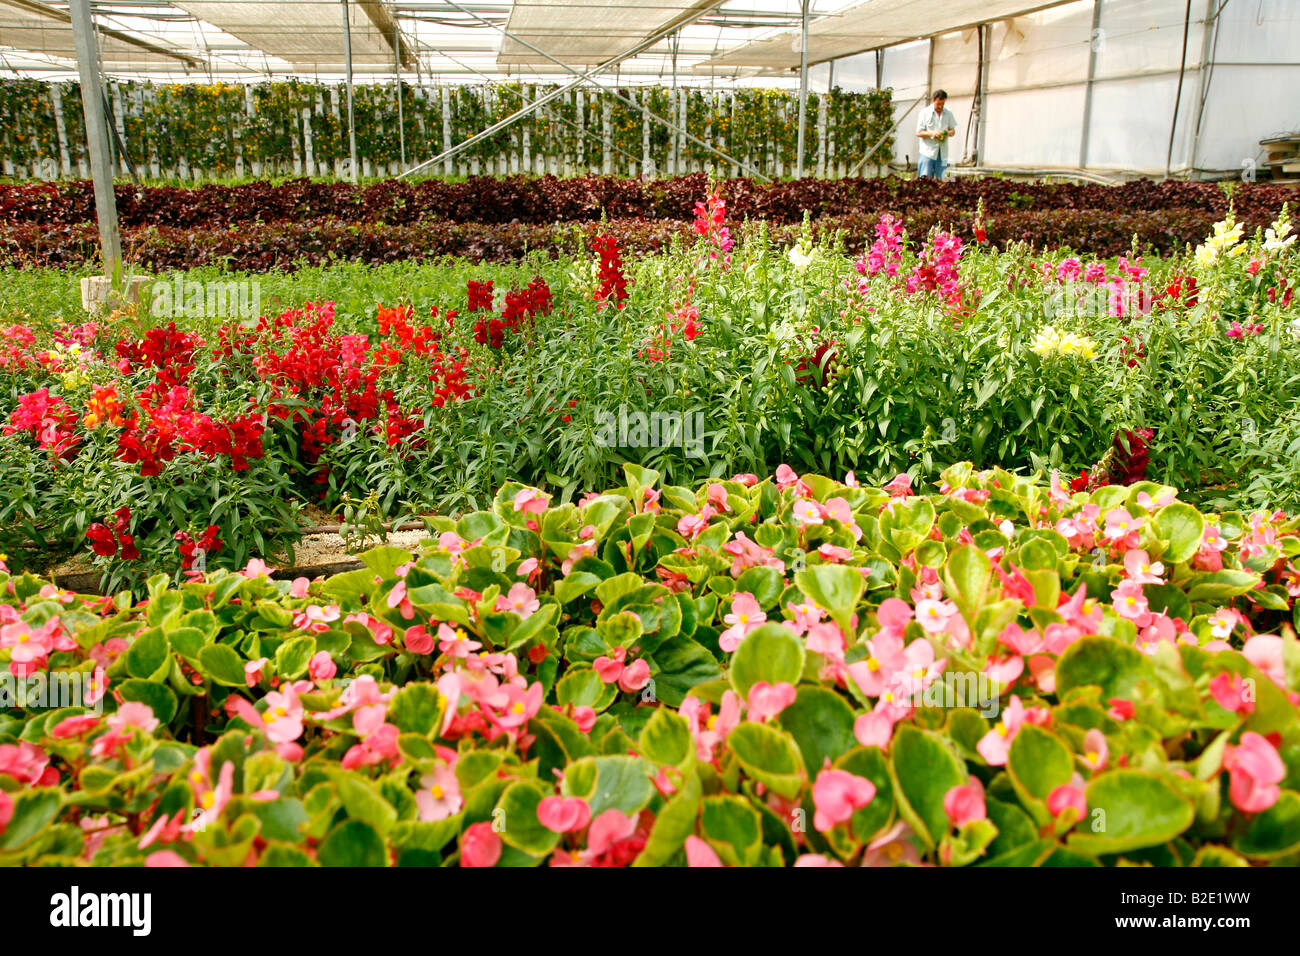 Edible flowers for restaurants in a greenhouse. Stock Photo